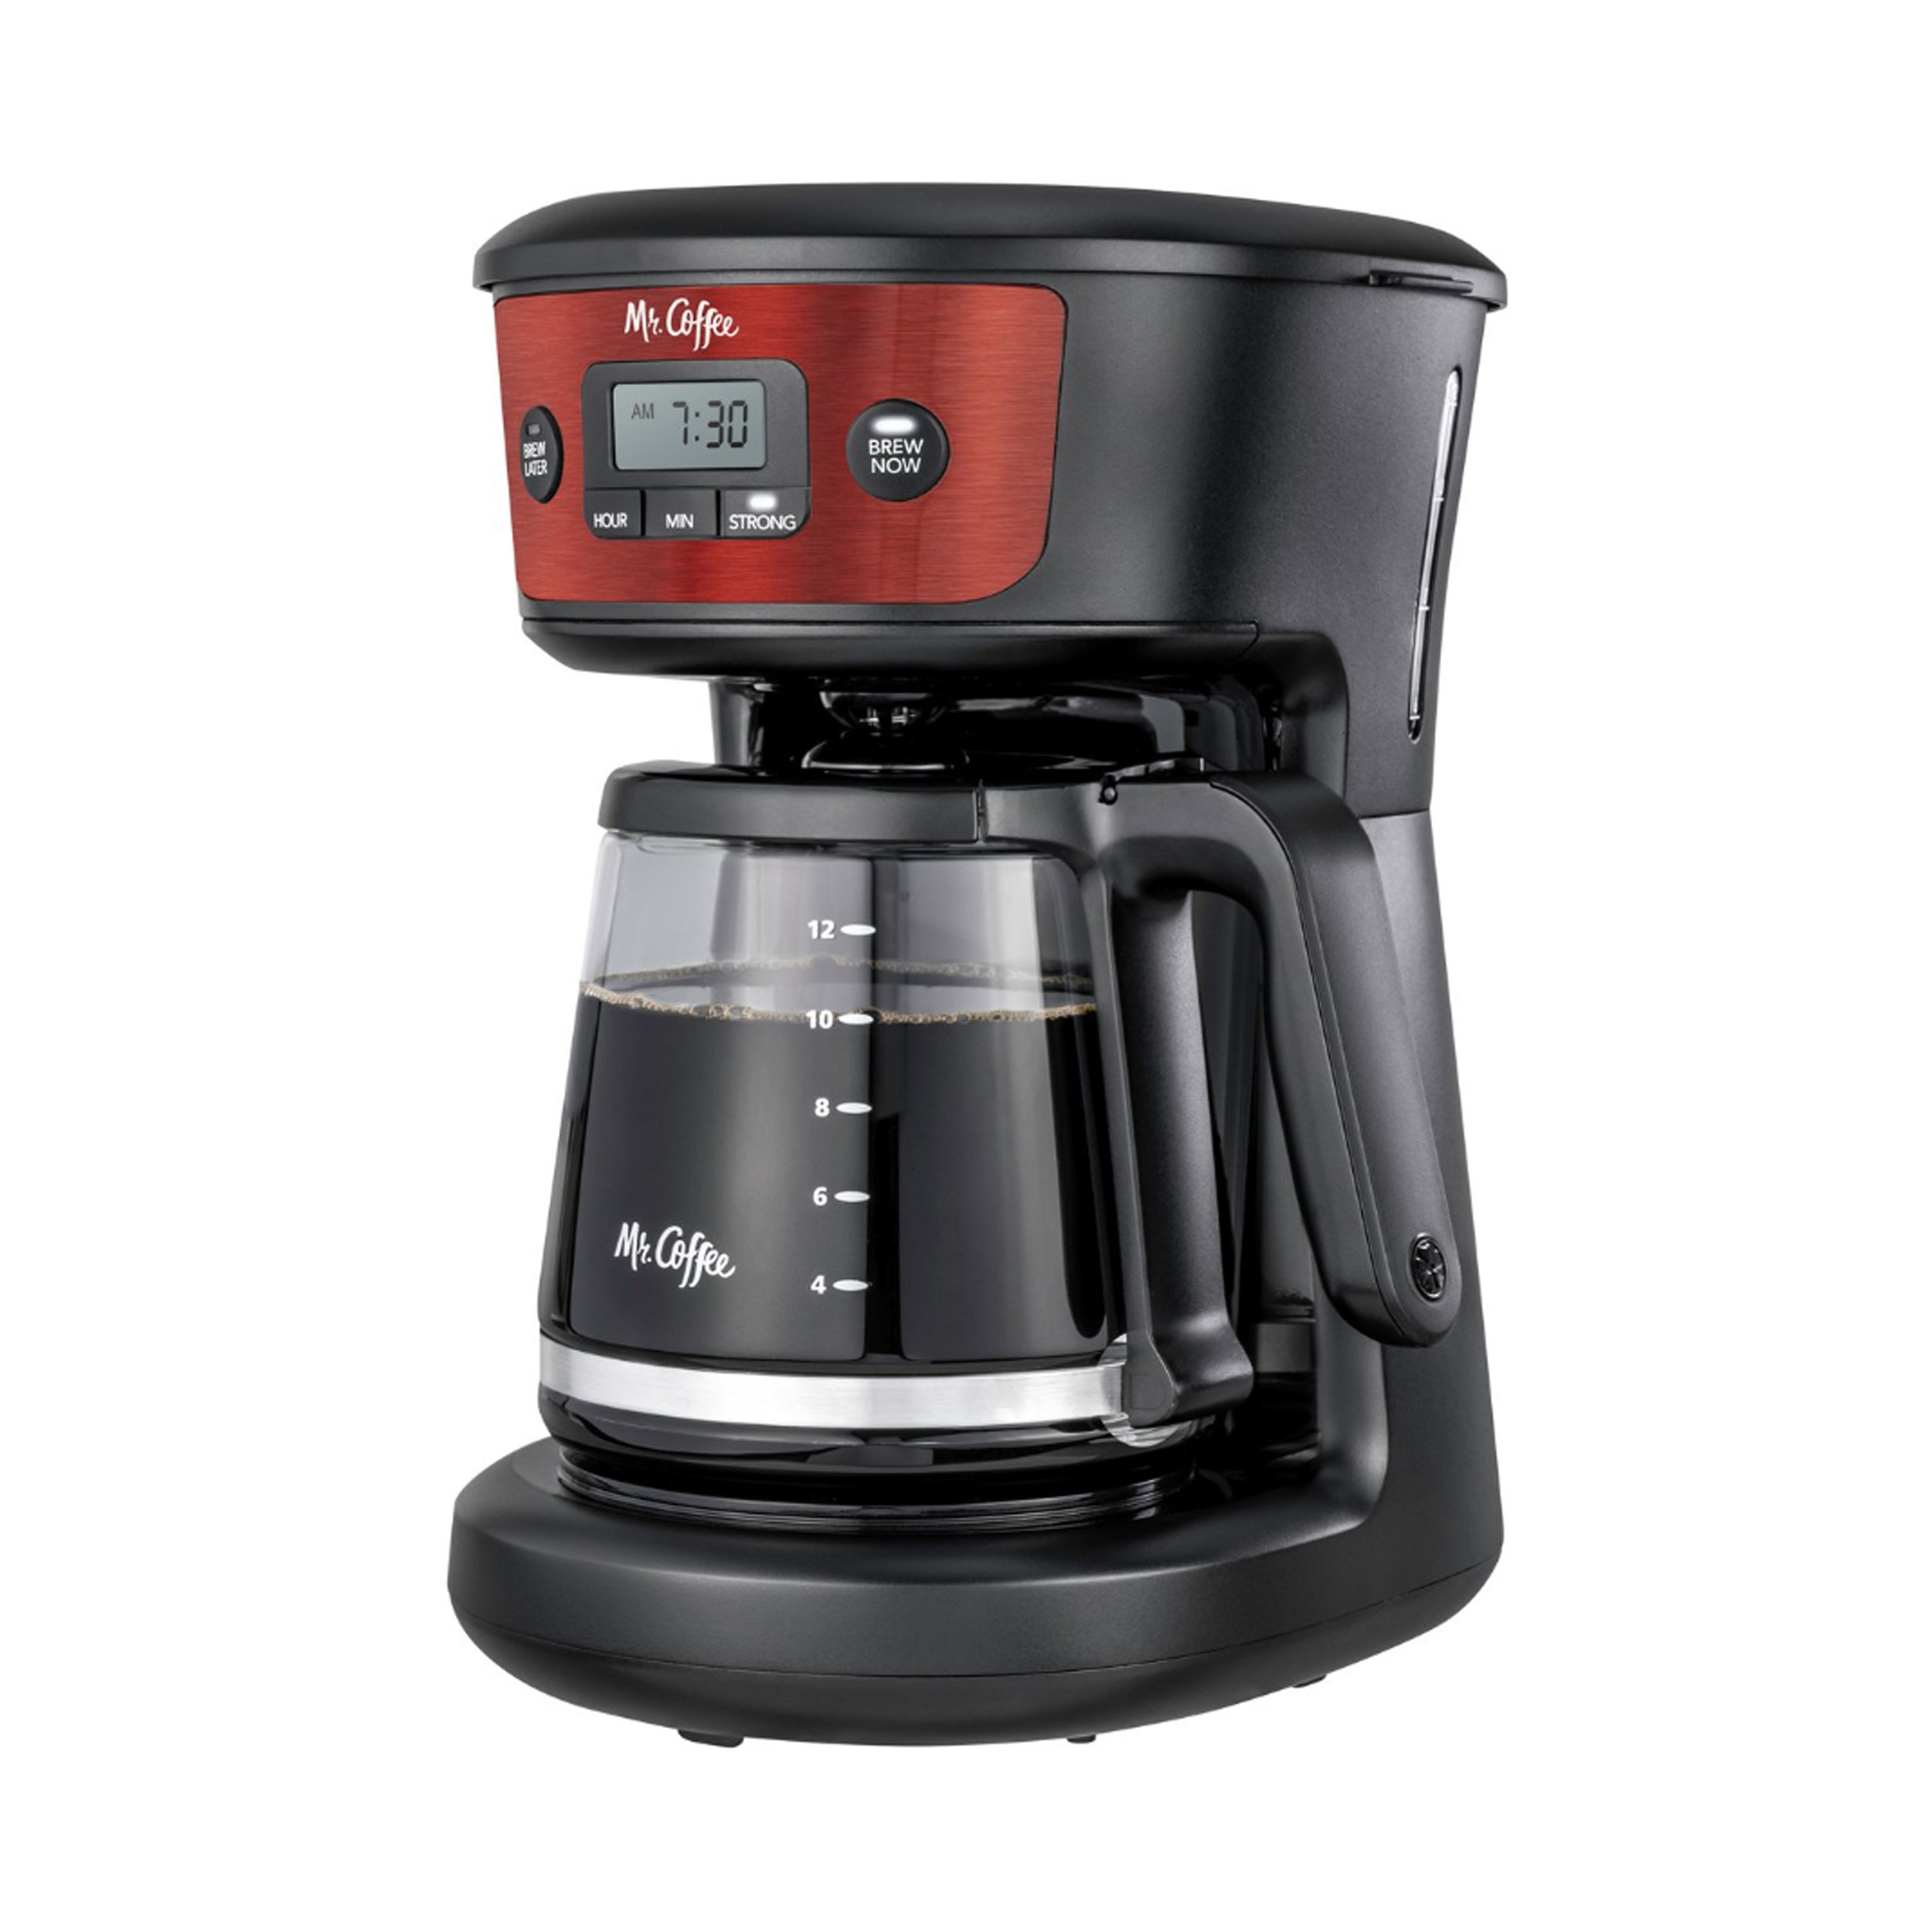 Mr. Coffee 12-Cup Programmable Coffeemaker, Strong Brew Selector